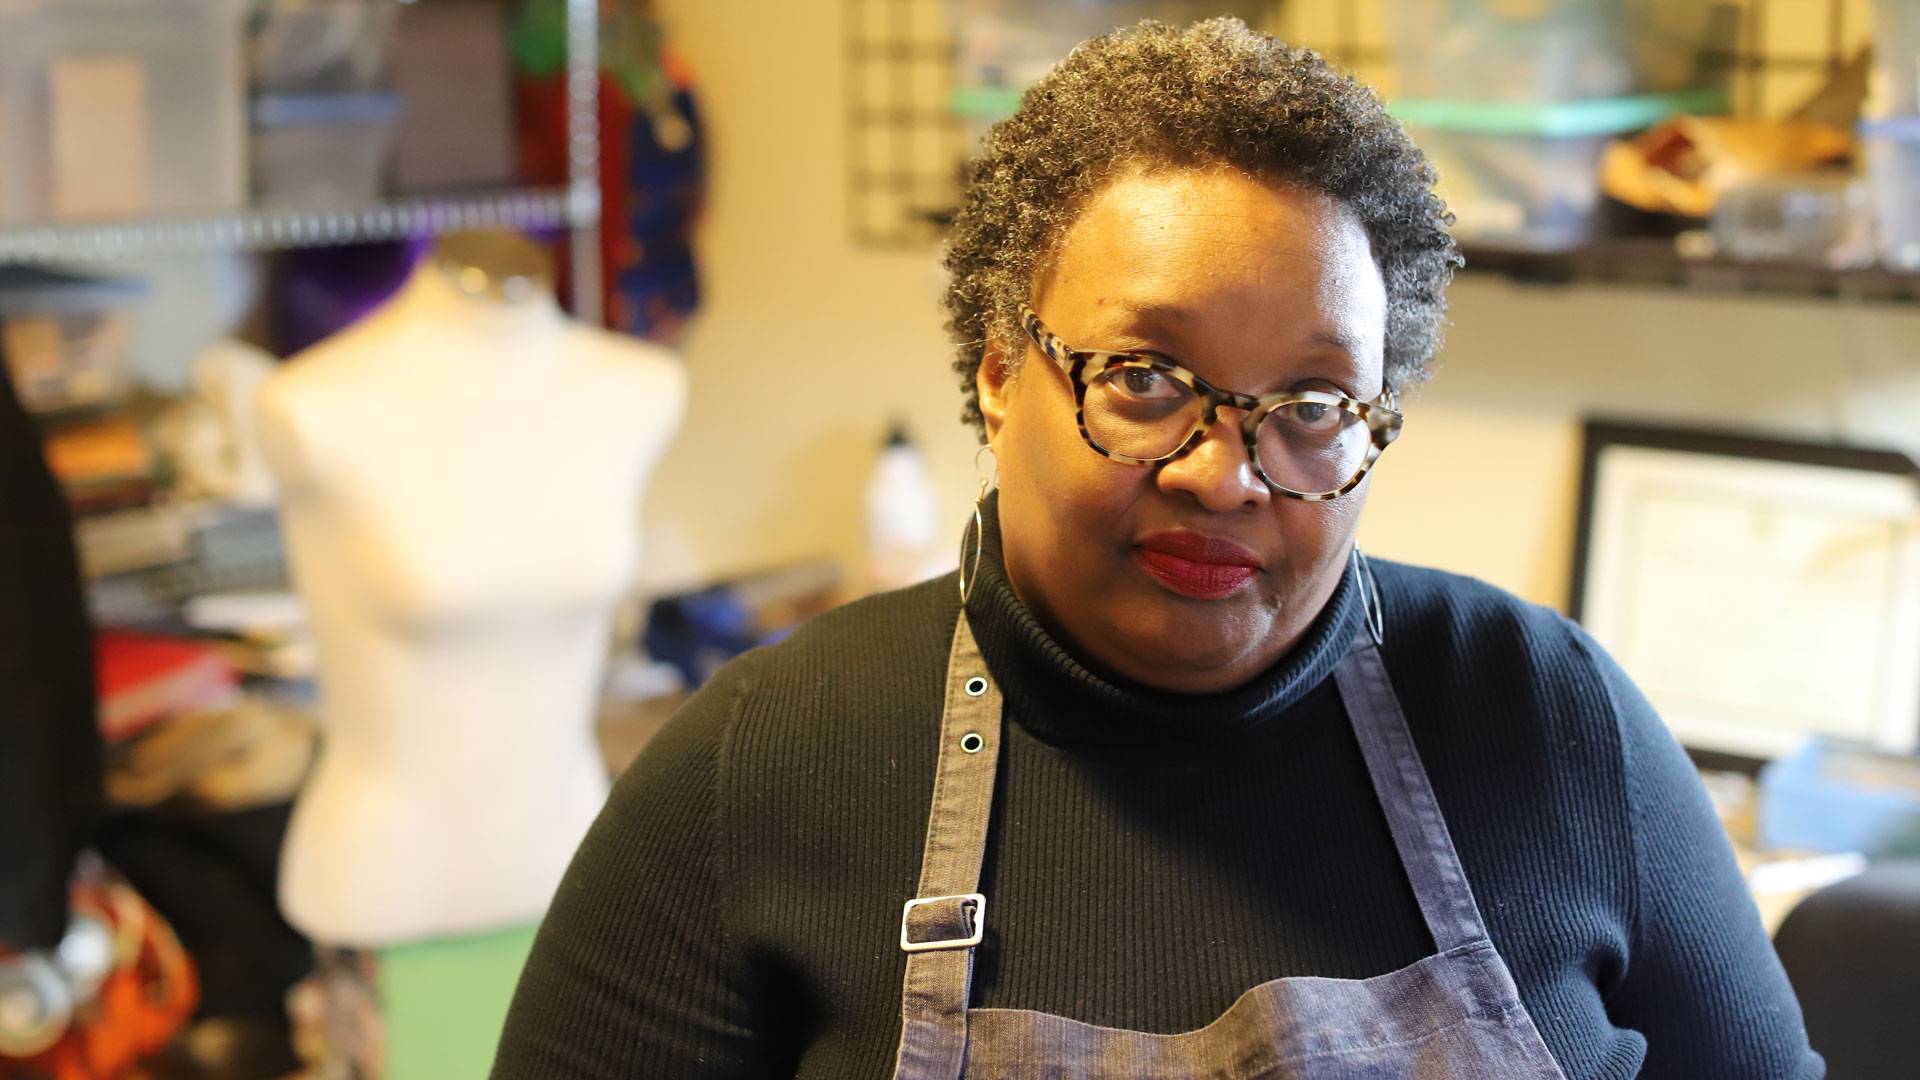 Oakland metalsmith Karen Smith is launching a new nonprofit, We Wield the Hammer, to bring metalwork to other black women and girls. Sam Lefebvre/KQED